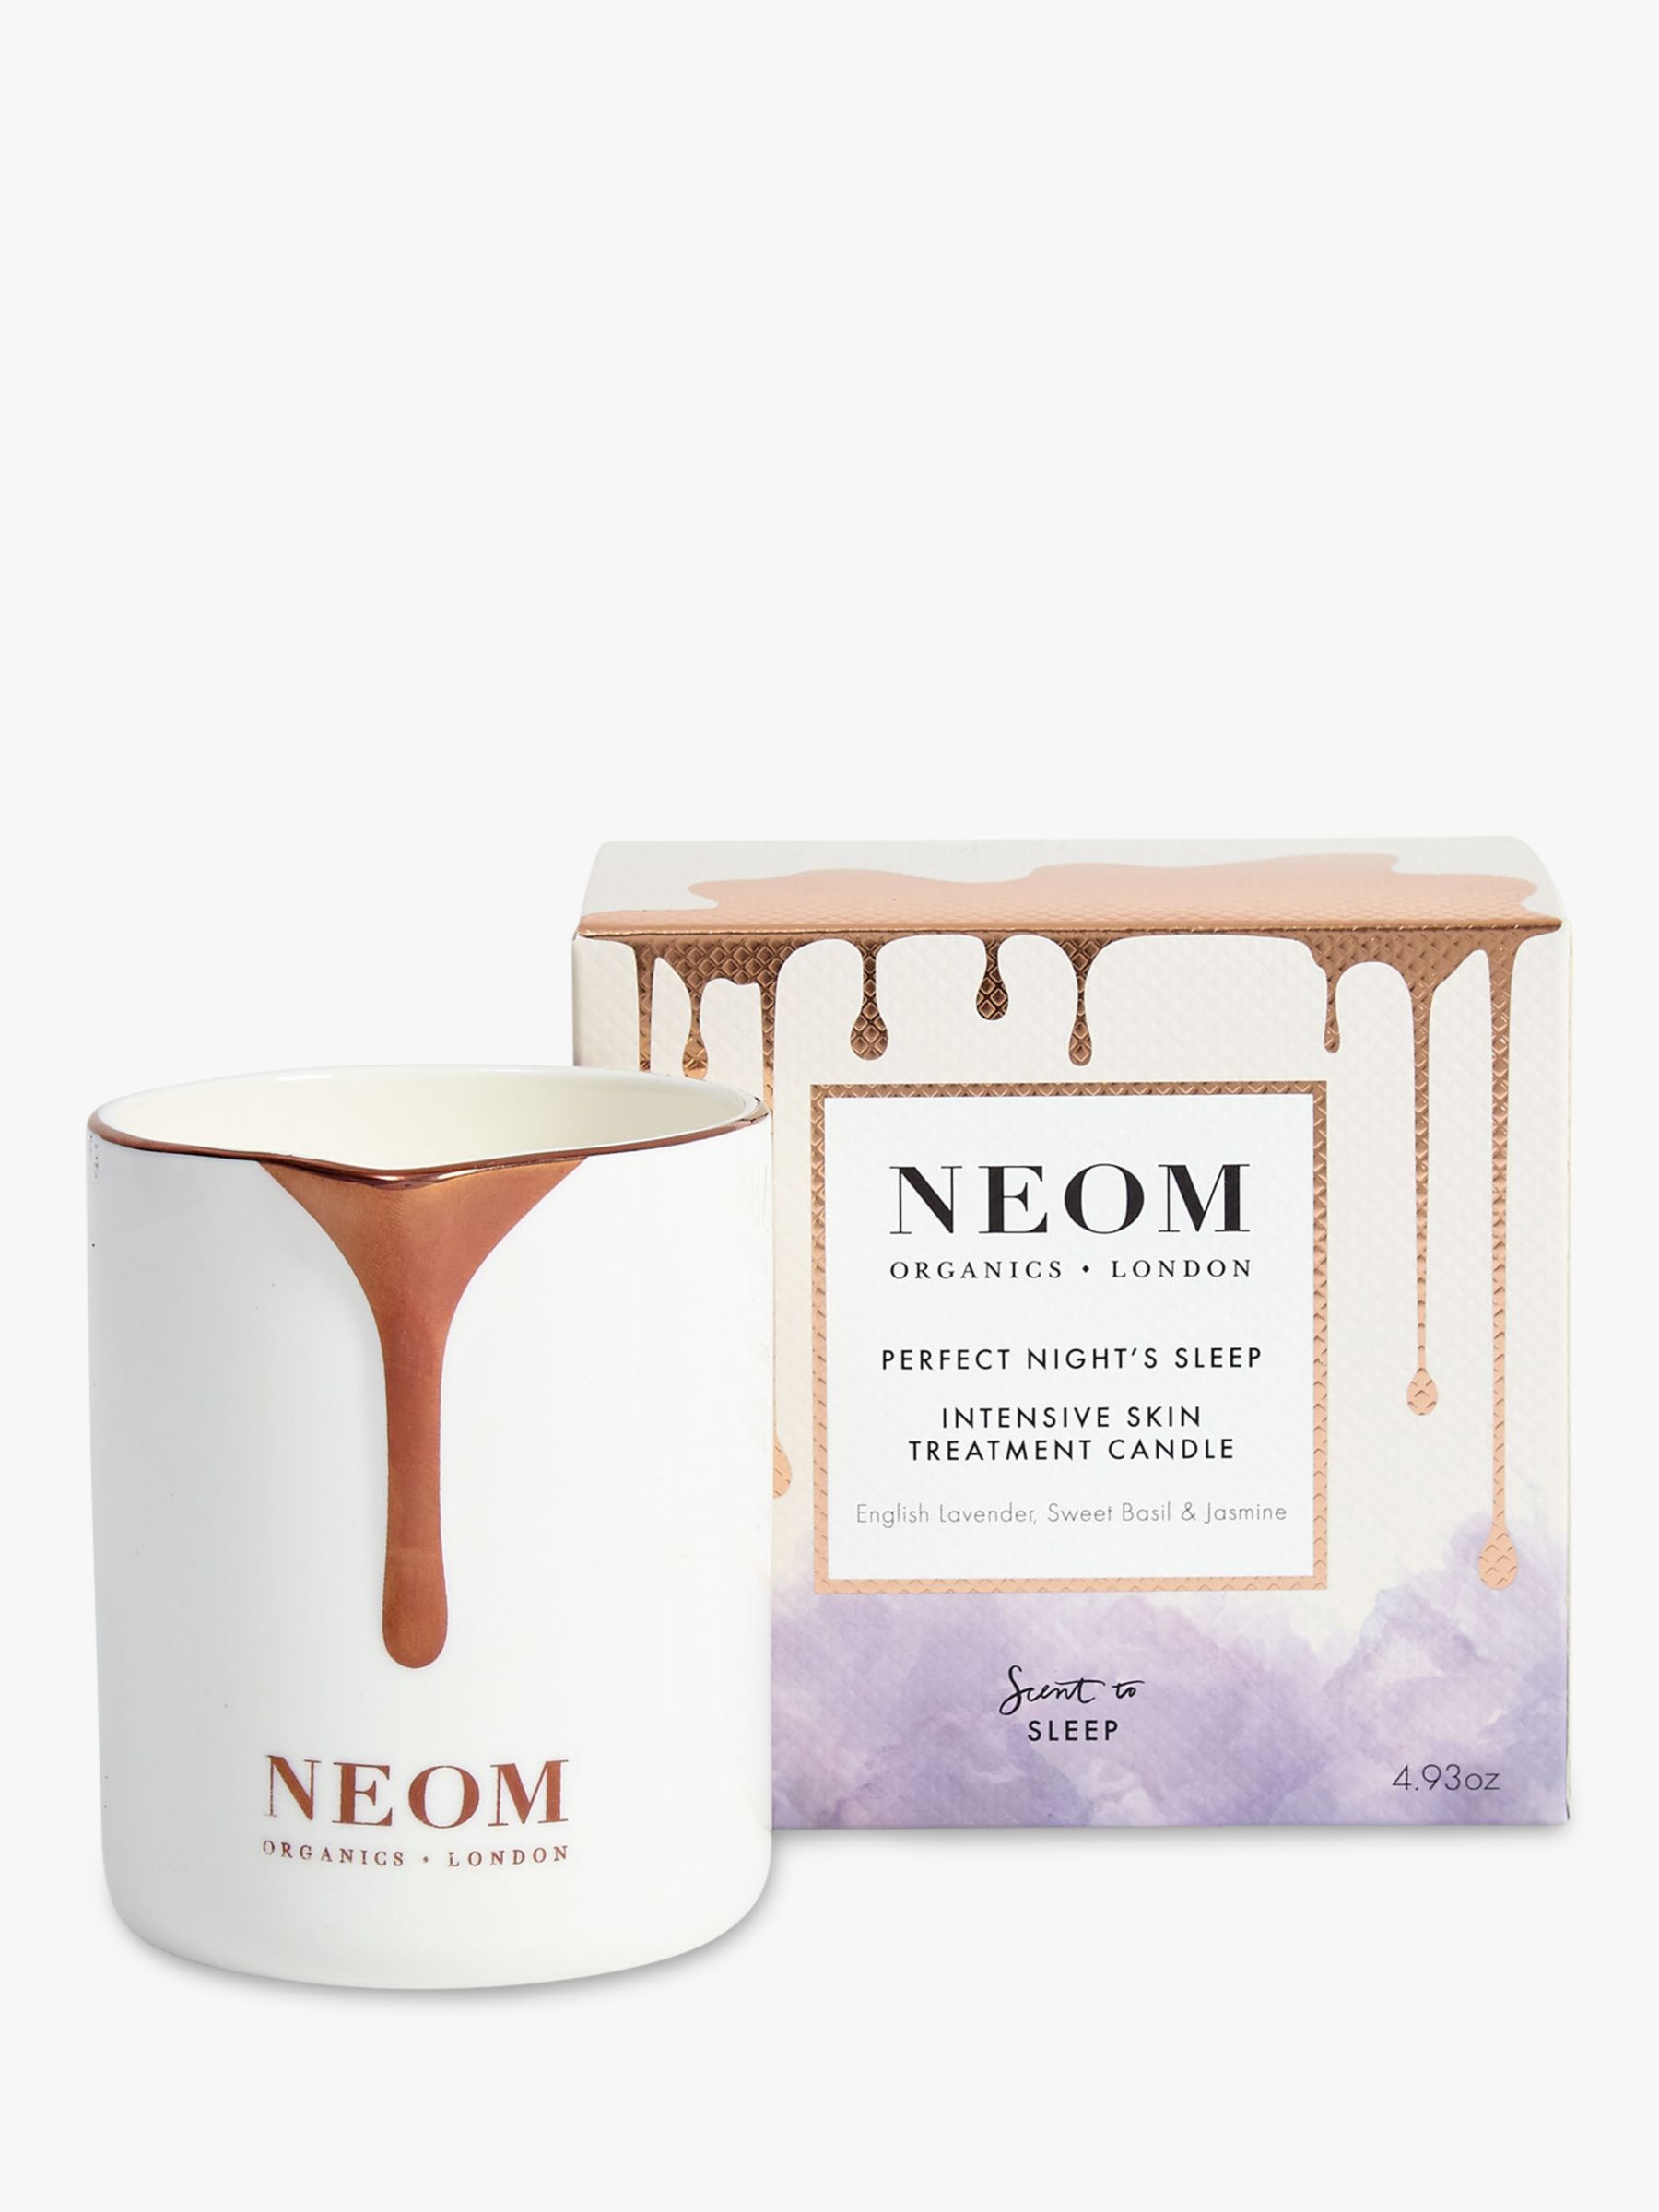 Neom Organics London Tranquility Skin Treatment Scented Candle, 140g 1